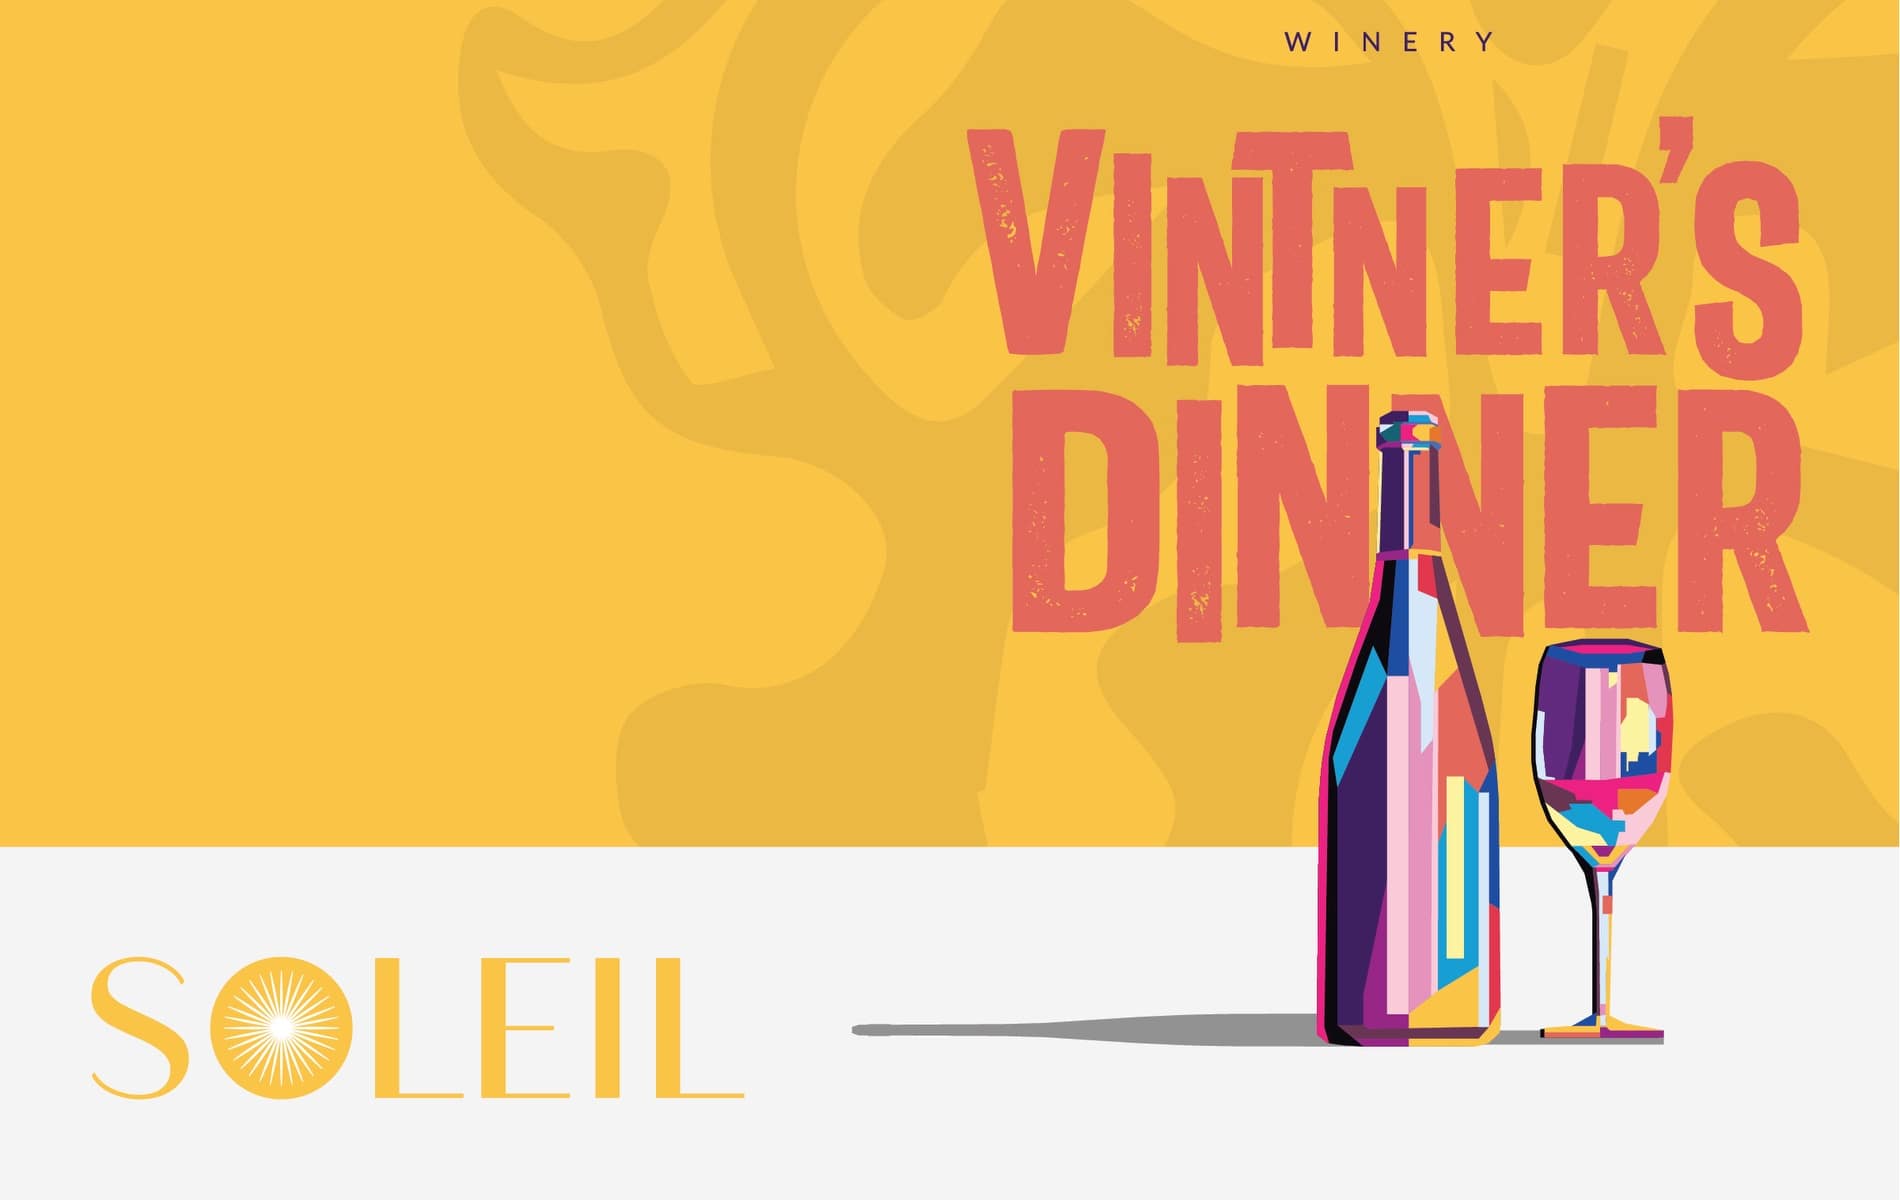 Soleil to Host Thompson Winery Vintners Dinner Benefiting Emerald Coast Children’s Advocacy Center